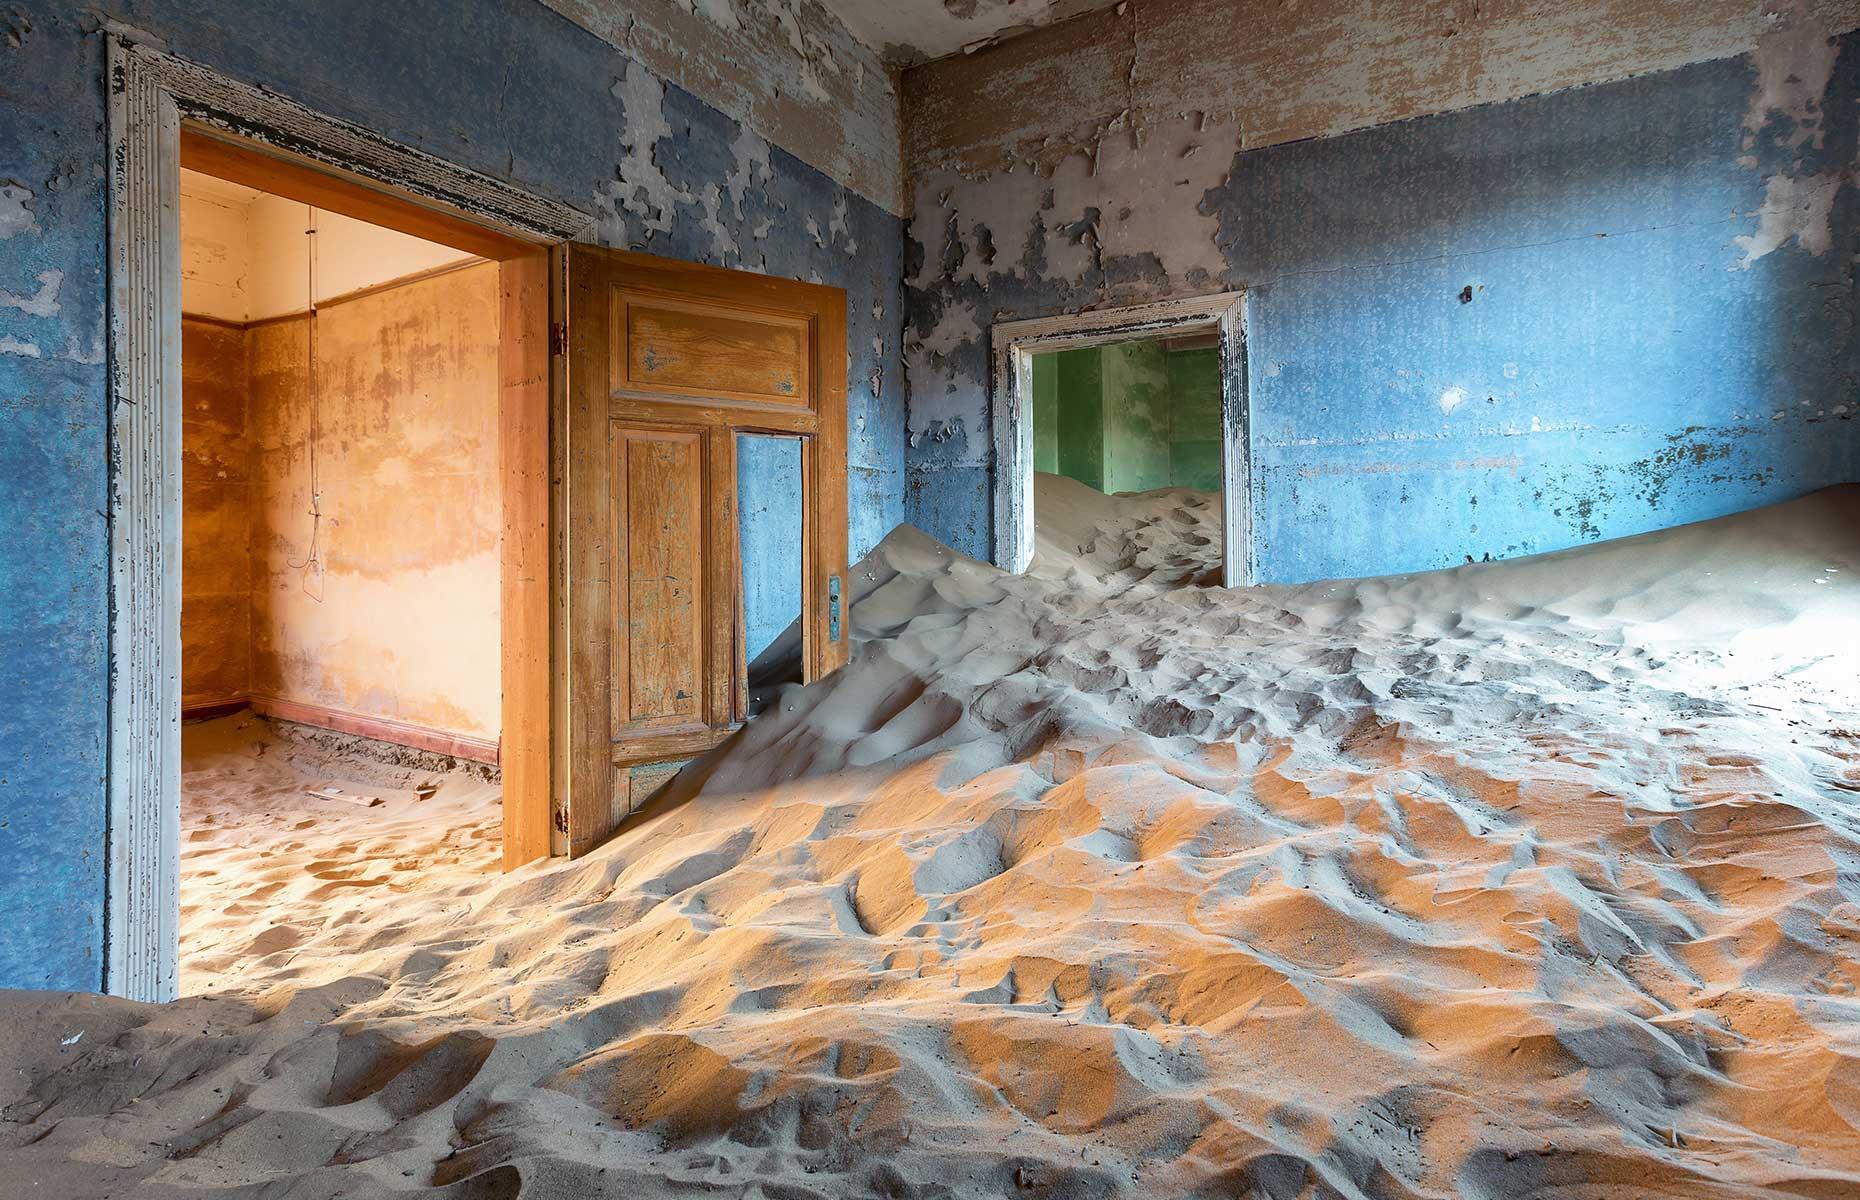 Slide 53 of 64: Desert sand seeps into every crevice of Kolmanskop, a ghost town in the Namib. It covers the floors of now derelict houses, forcing doors off their hinges as it reclaims the space. A mere century ago, Kolmanskop was a thriving miners’ town. In 1908, a local railway worker stumbled across what he thought was a diamond in the area. Once his find was verified, predominantly German miners rushed here in the hope of making their fortune.